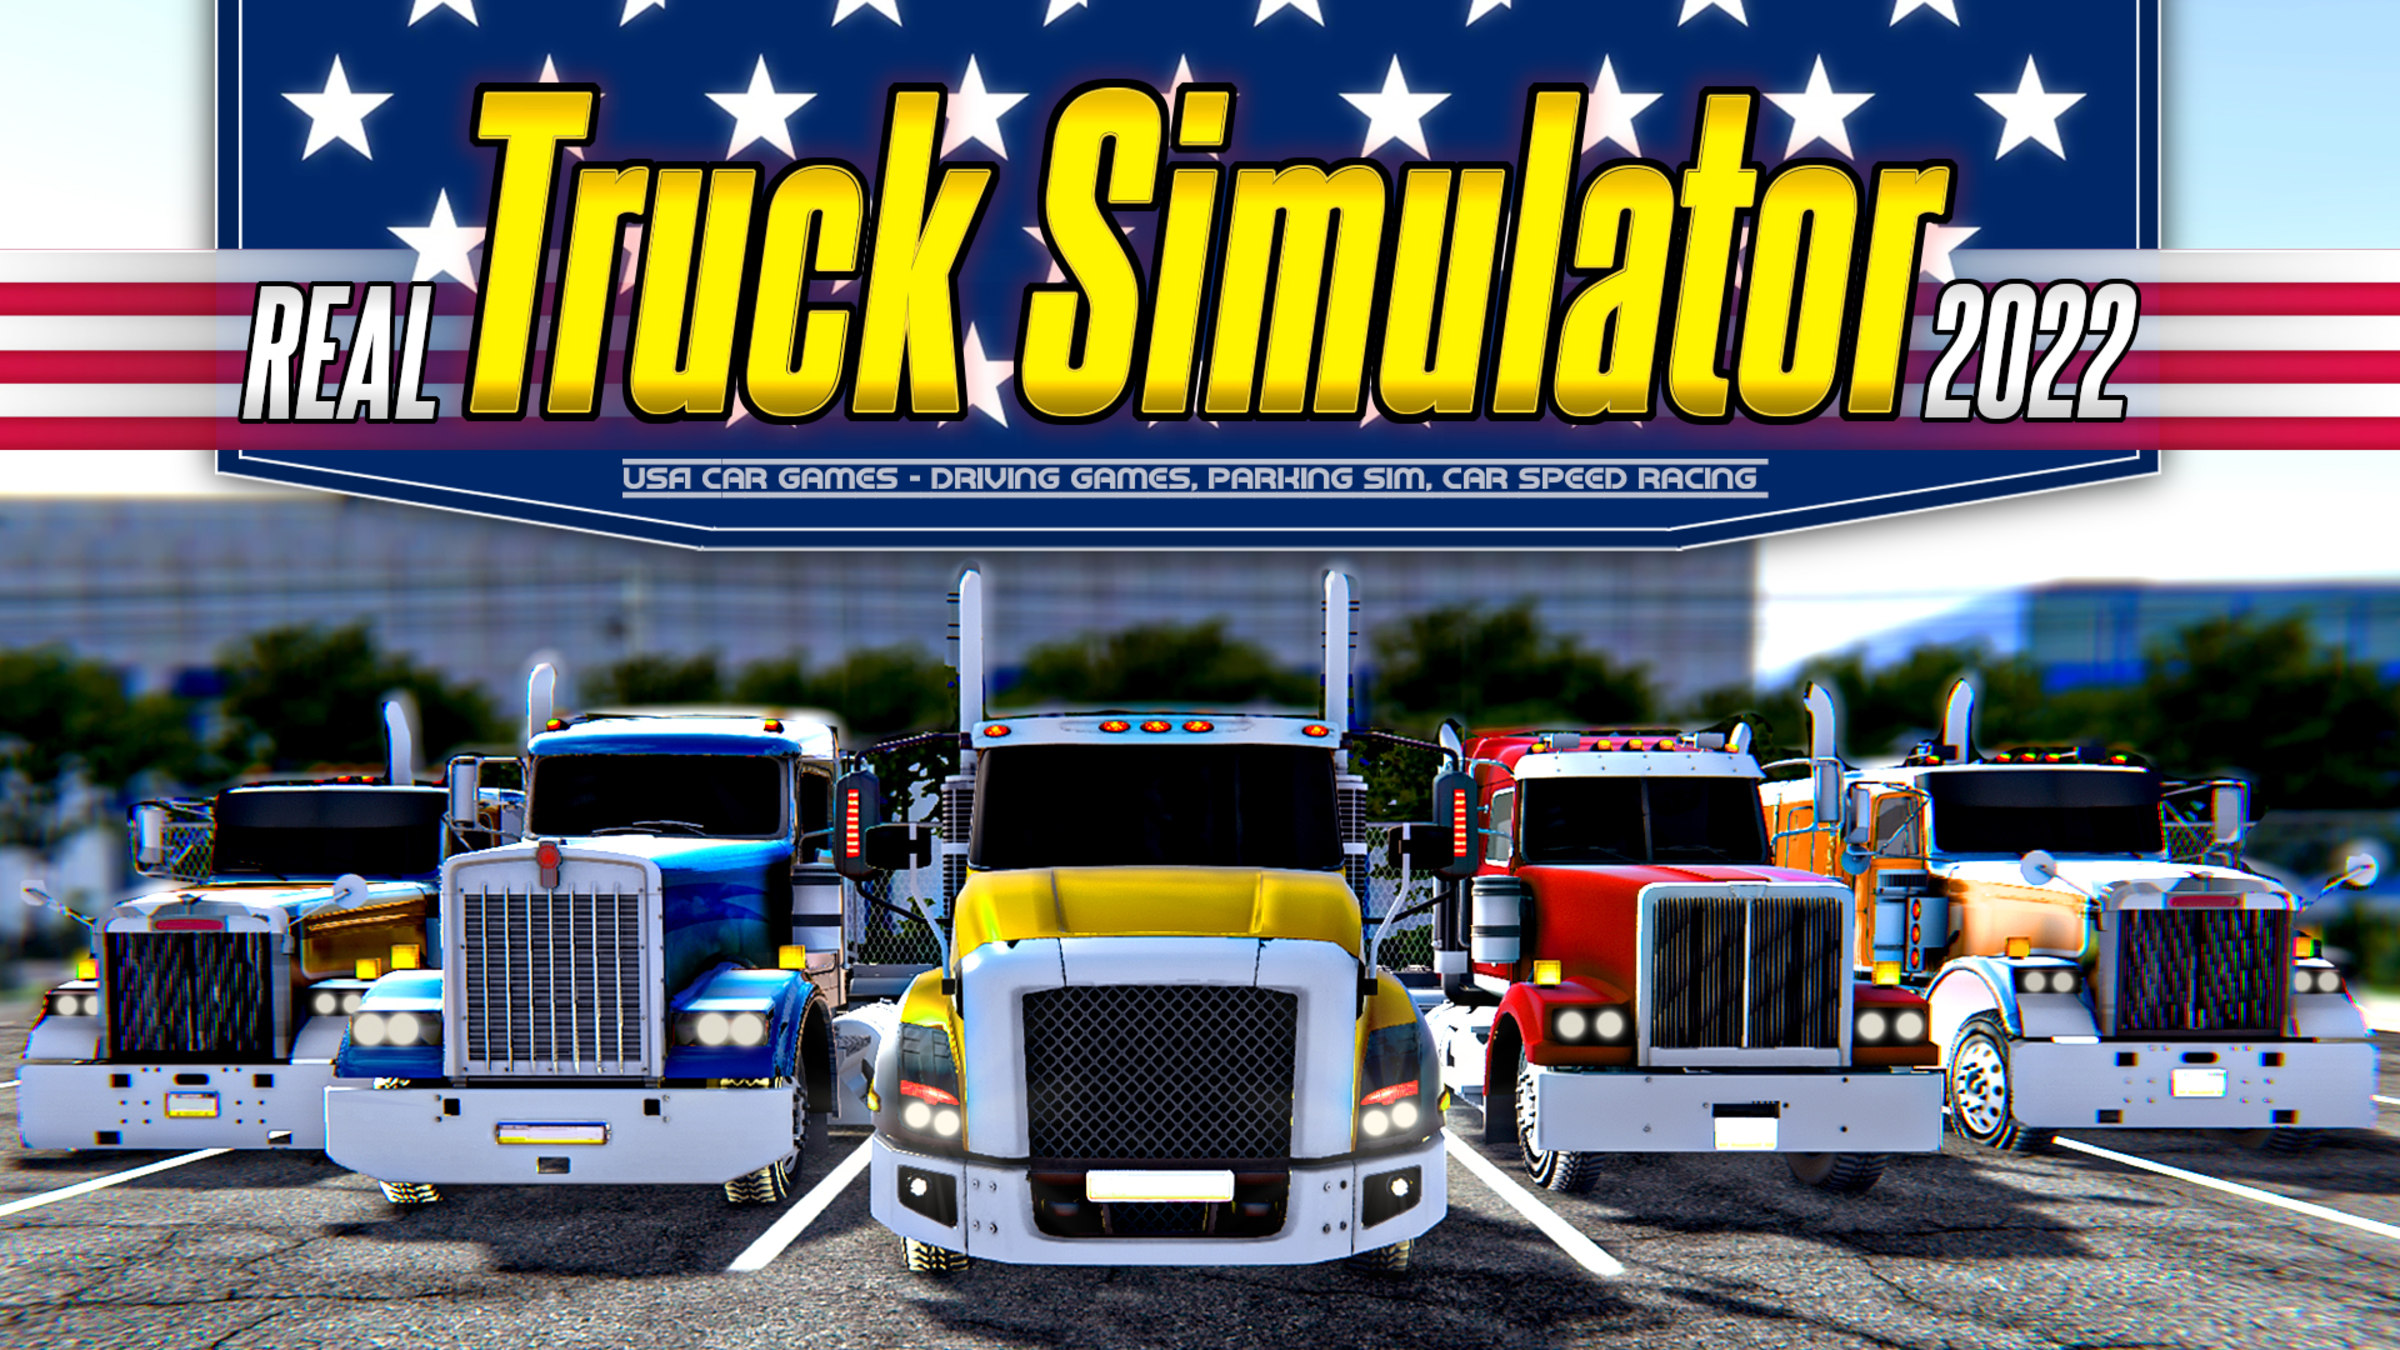 Real Truck Simulator USA Car Games - Driving Games, Parking Sim, Car Speed  Racing 2022 for Nintendo Switch - Nintendo Official Site